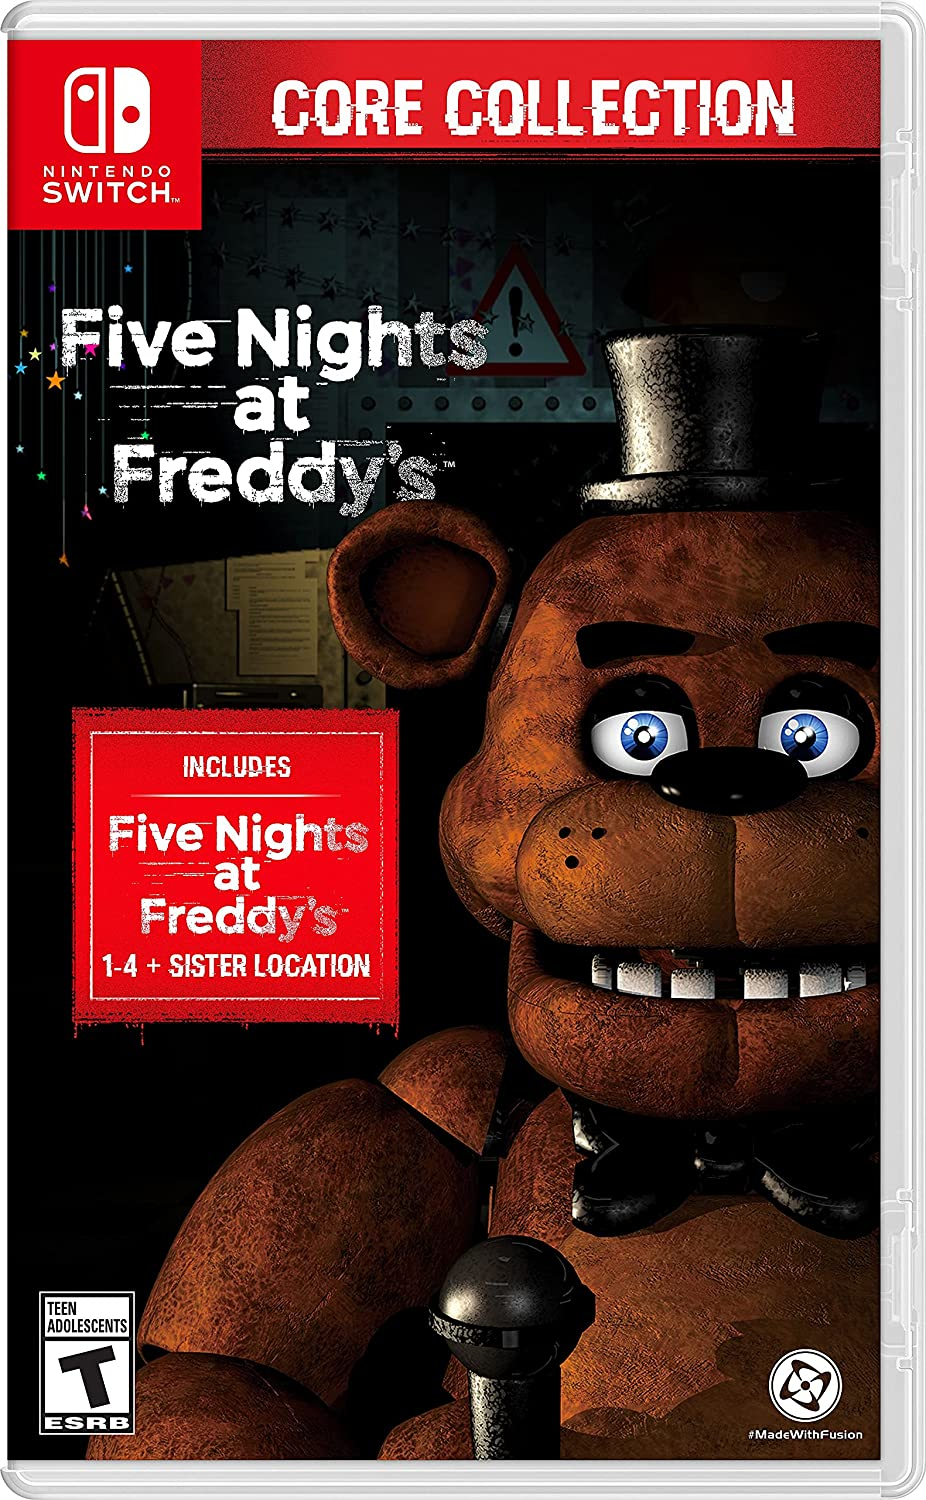 Five Nights at Freddys The Core Collection - Nintendo Switch